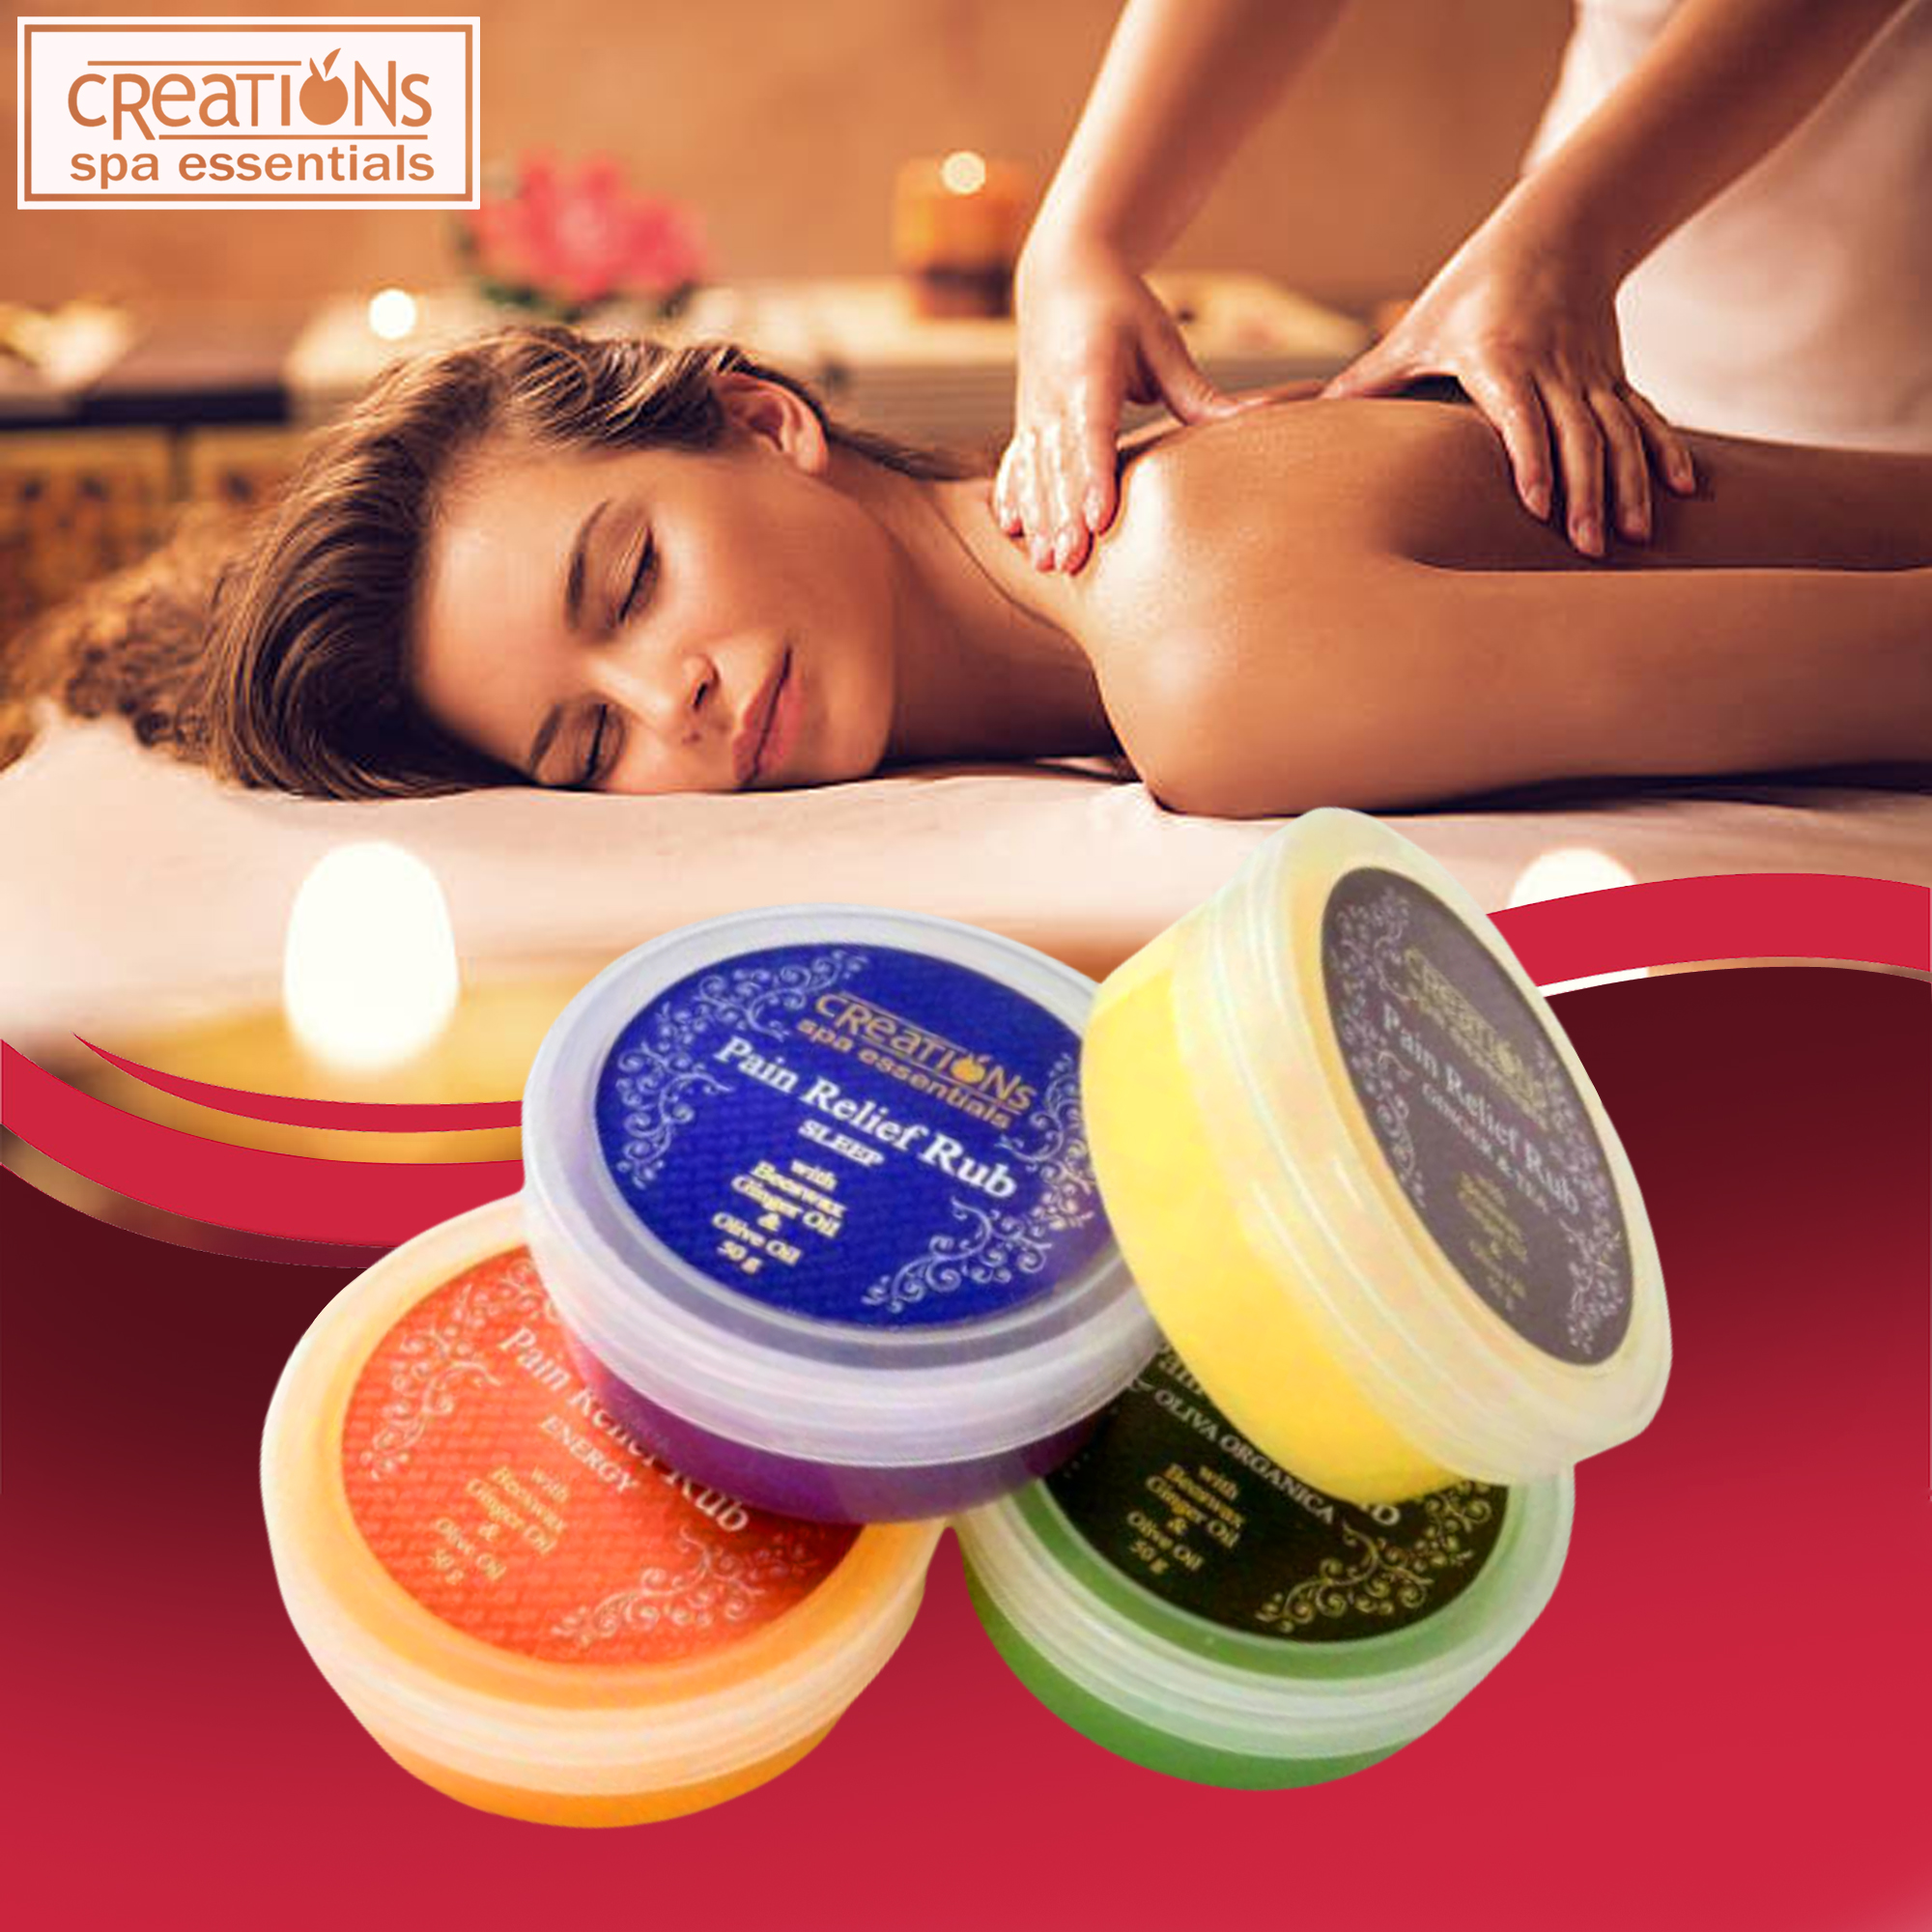 Creations Spa Essentials Pain Relief Rub and Massage Ointment 10g